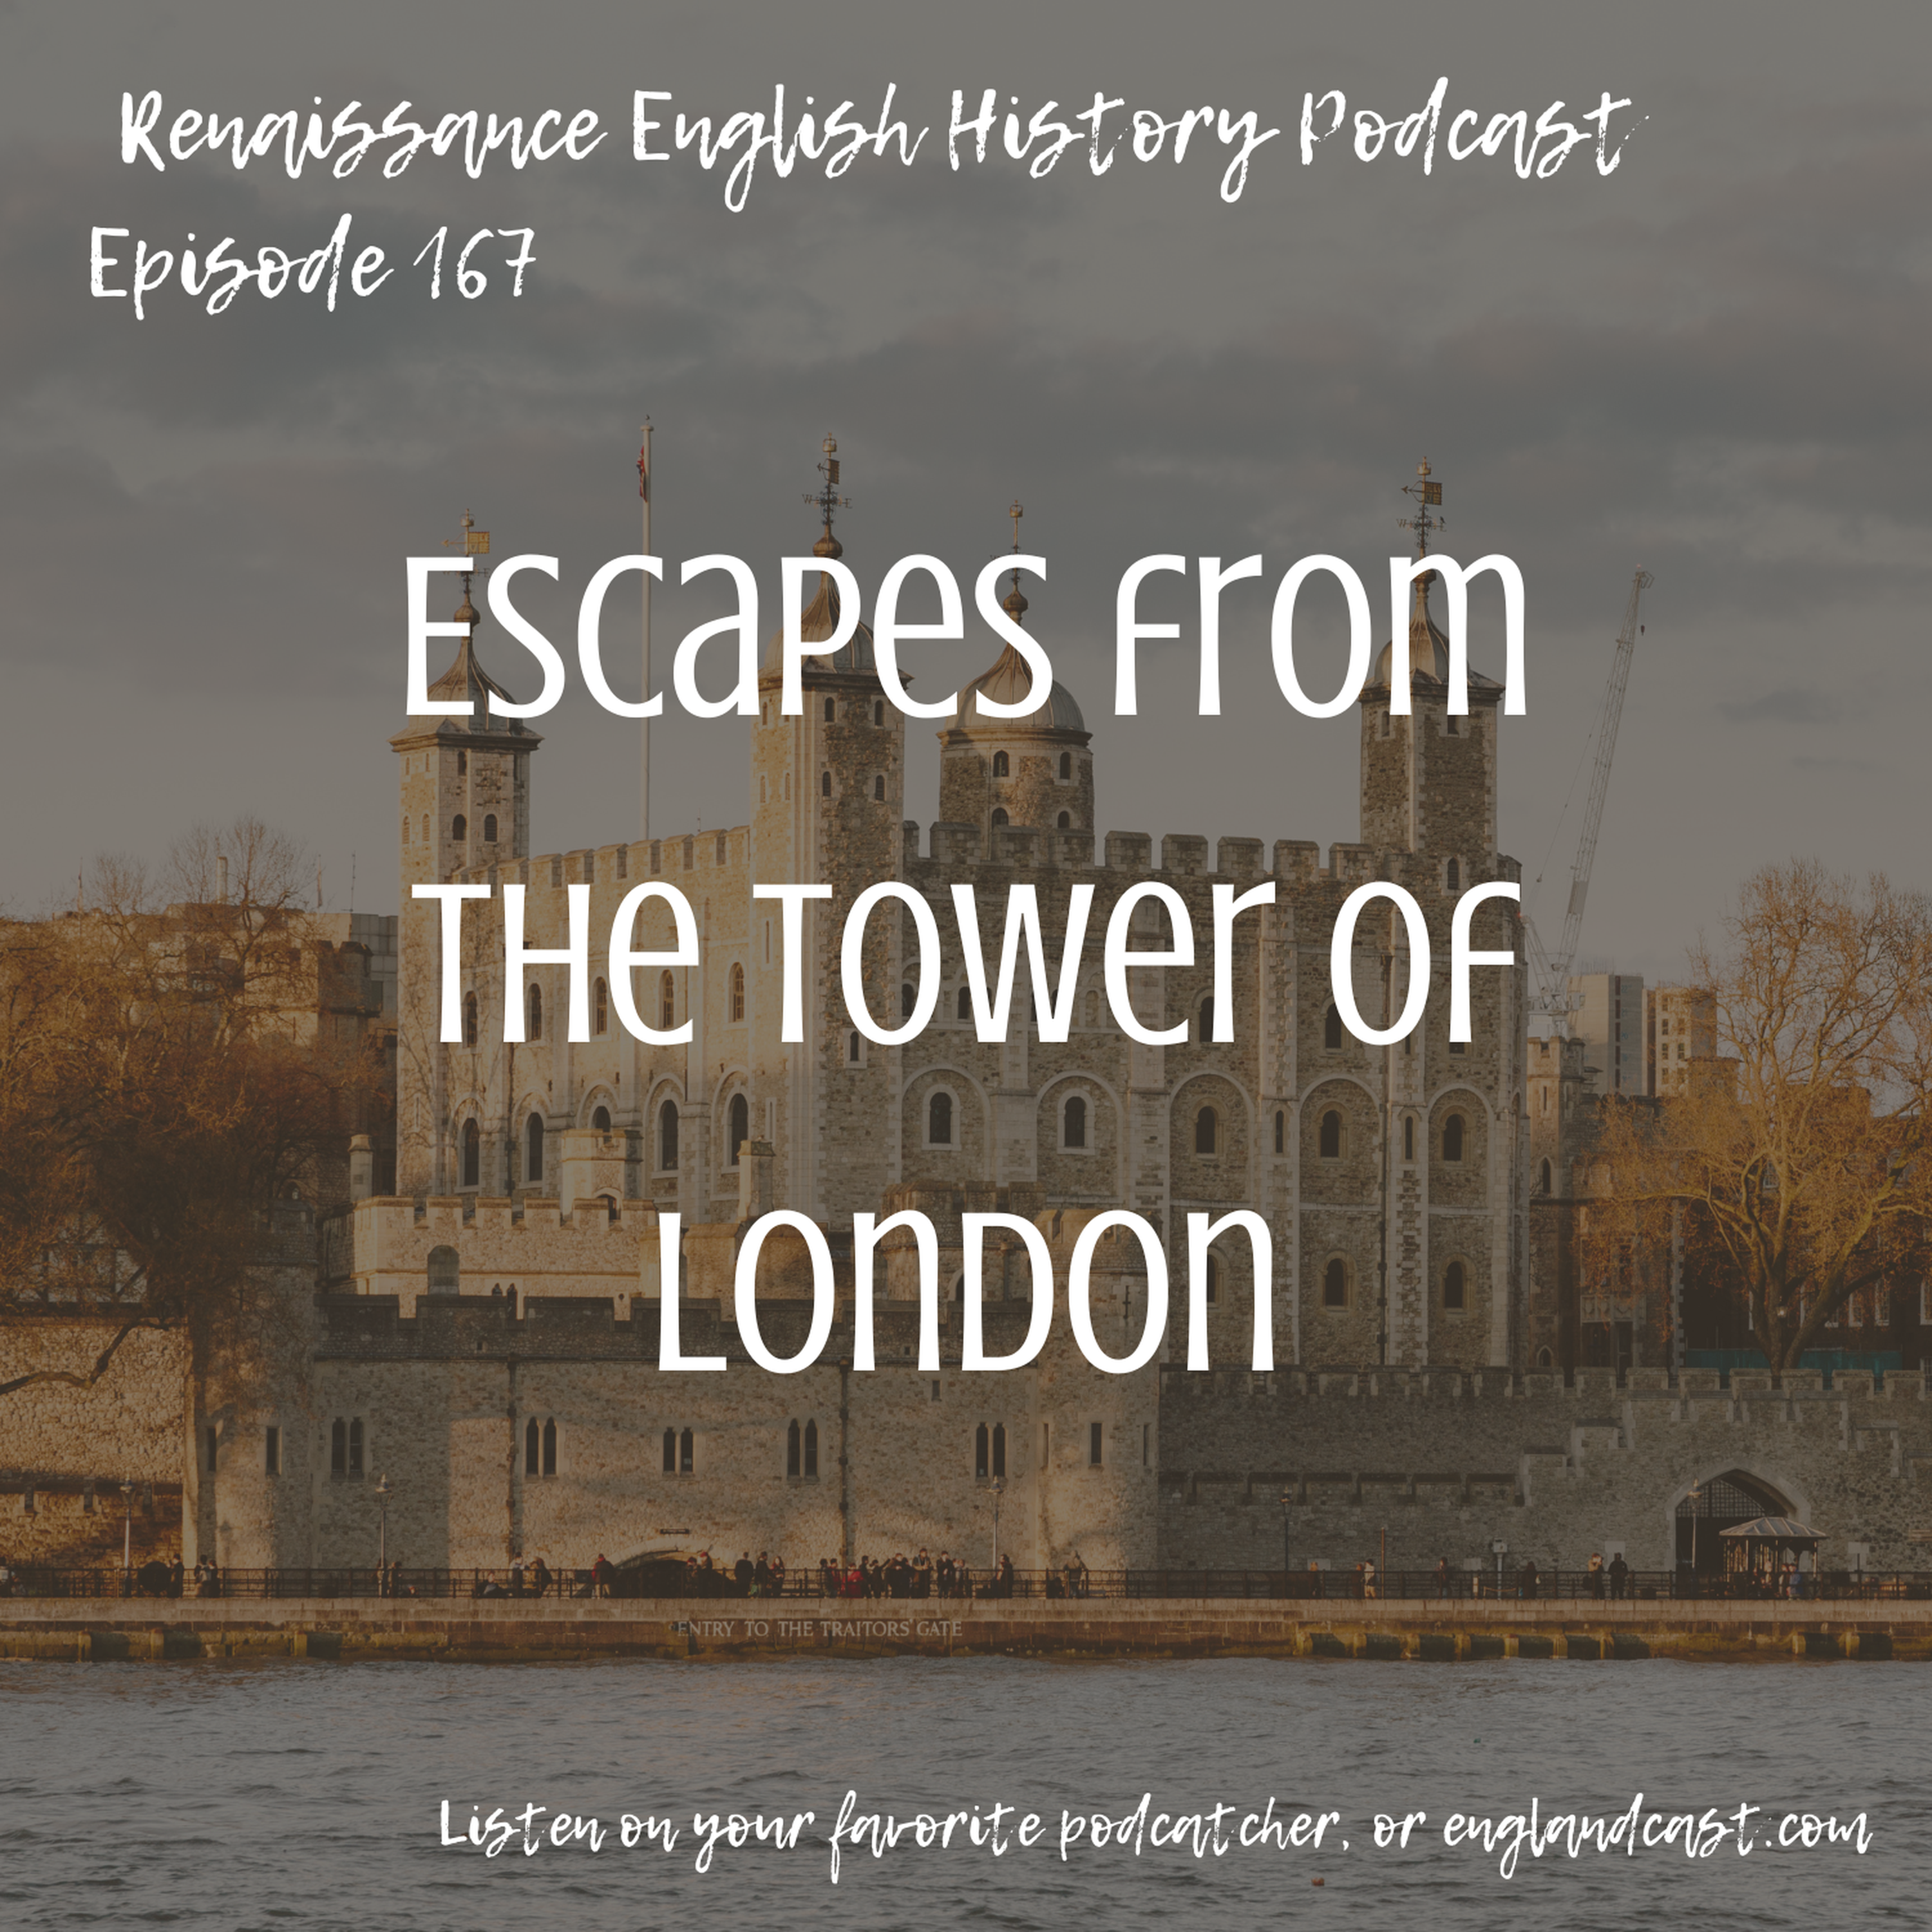 Episode 167: Escapes from the Tower of London